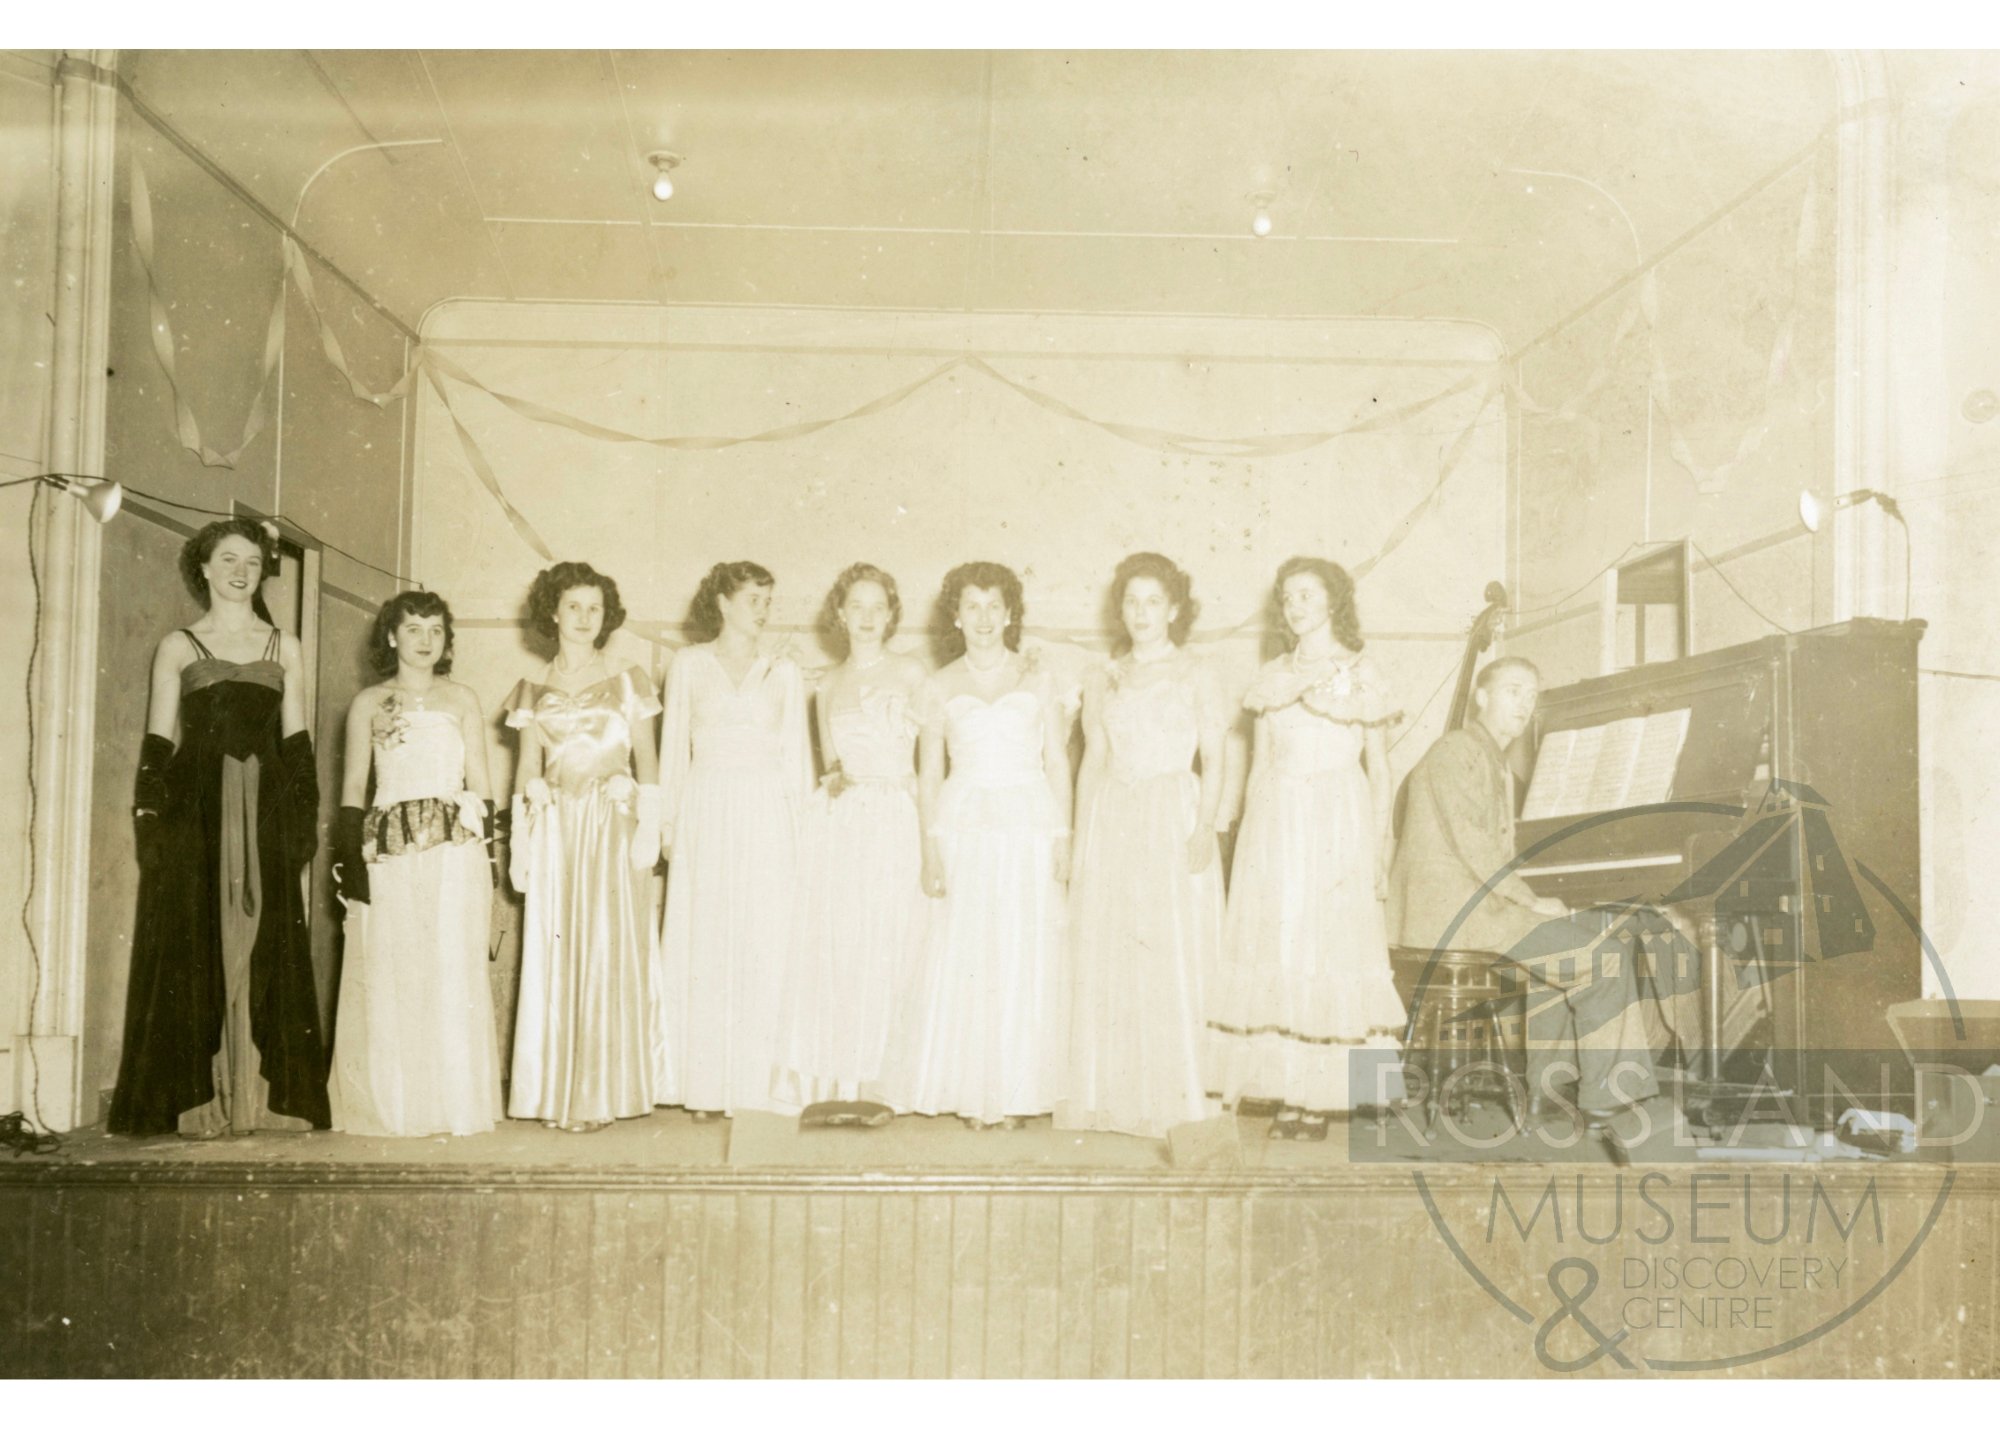  MS 75: Snow Queen contestants at the Rossland Miners’ Hall, circa 1950s. 